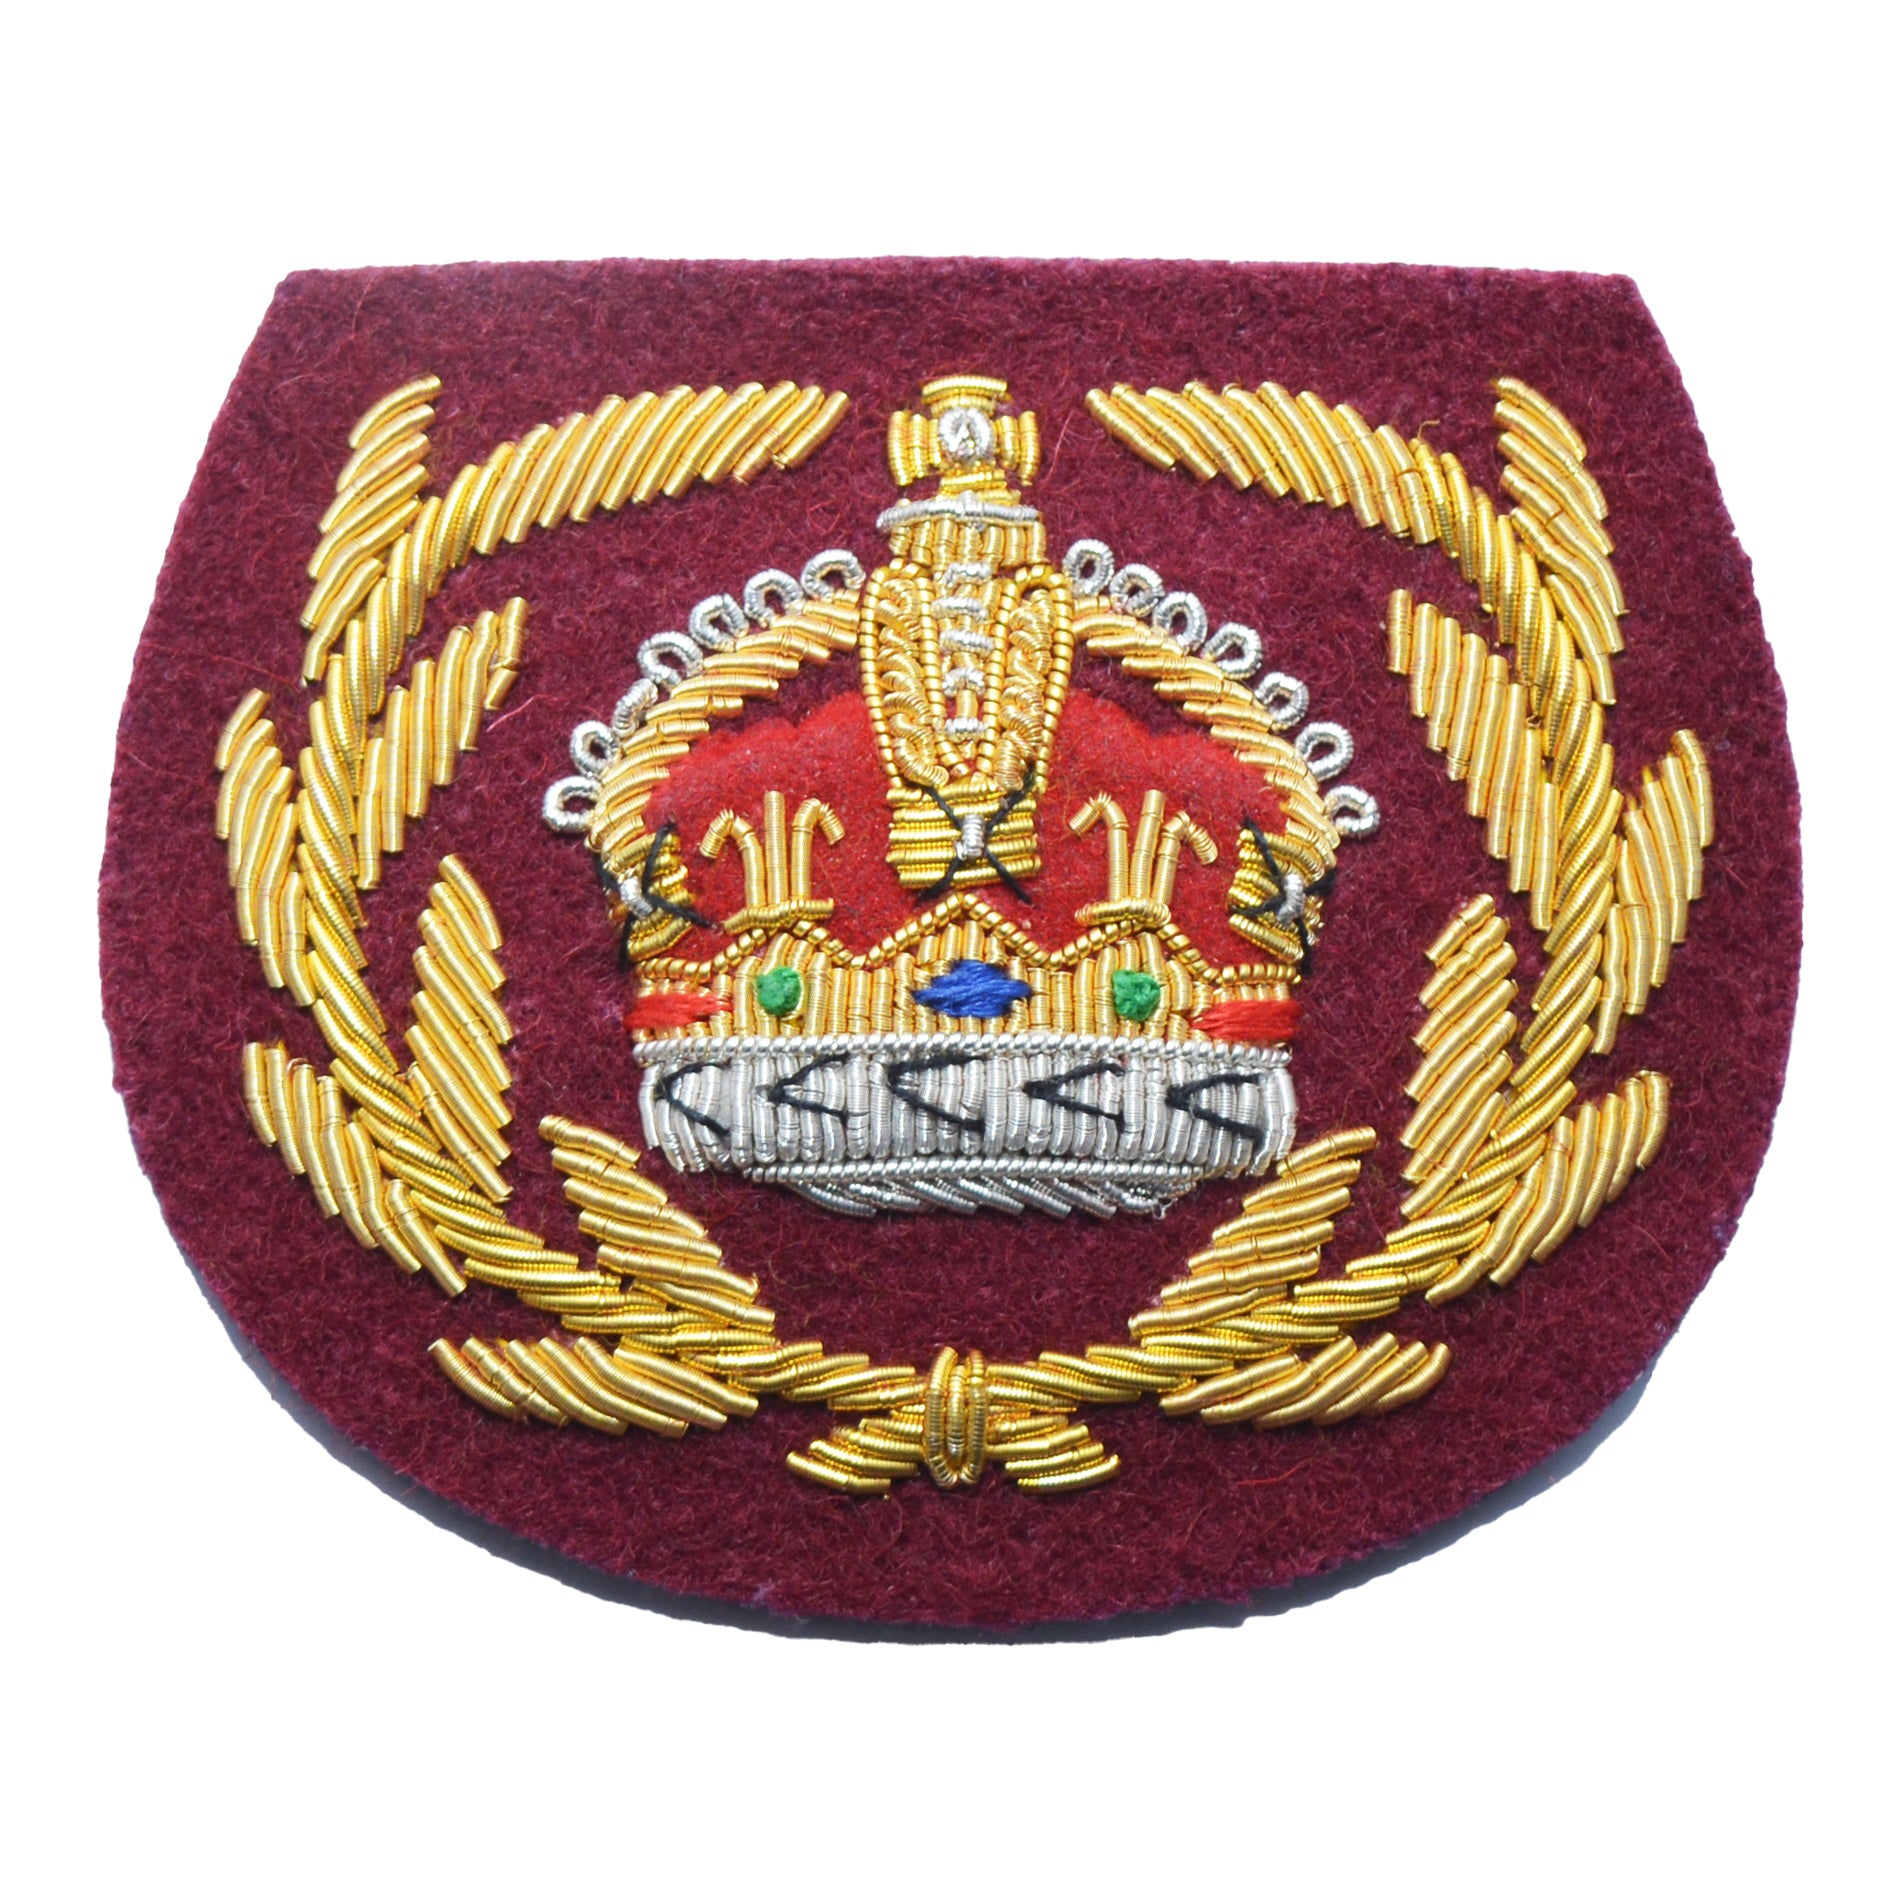 (King's Crown) Warrant Officer Class 2 (WO2) Royal Army Veterinary Corps Rank Badge Parachute Regiment British Army Badge